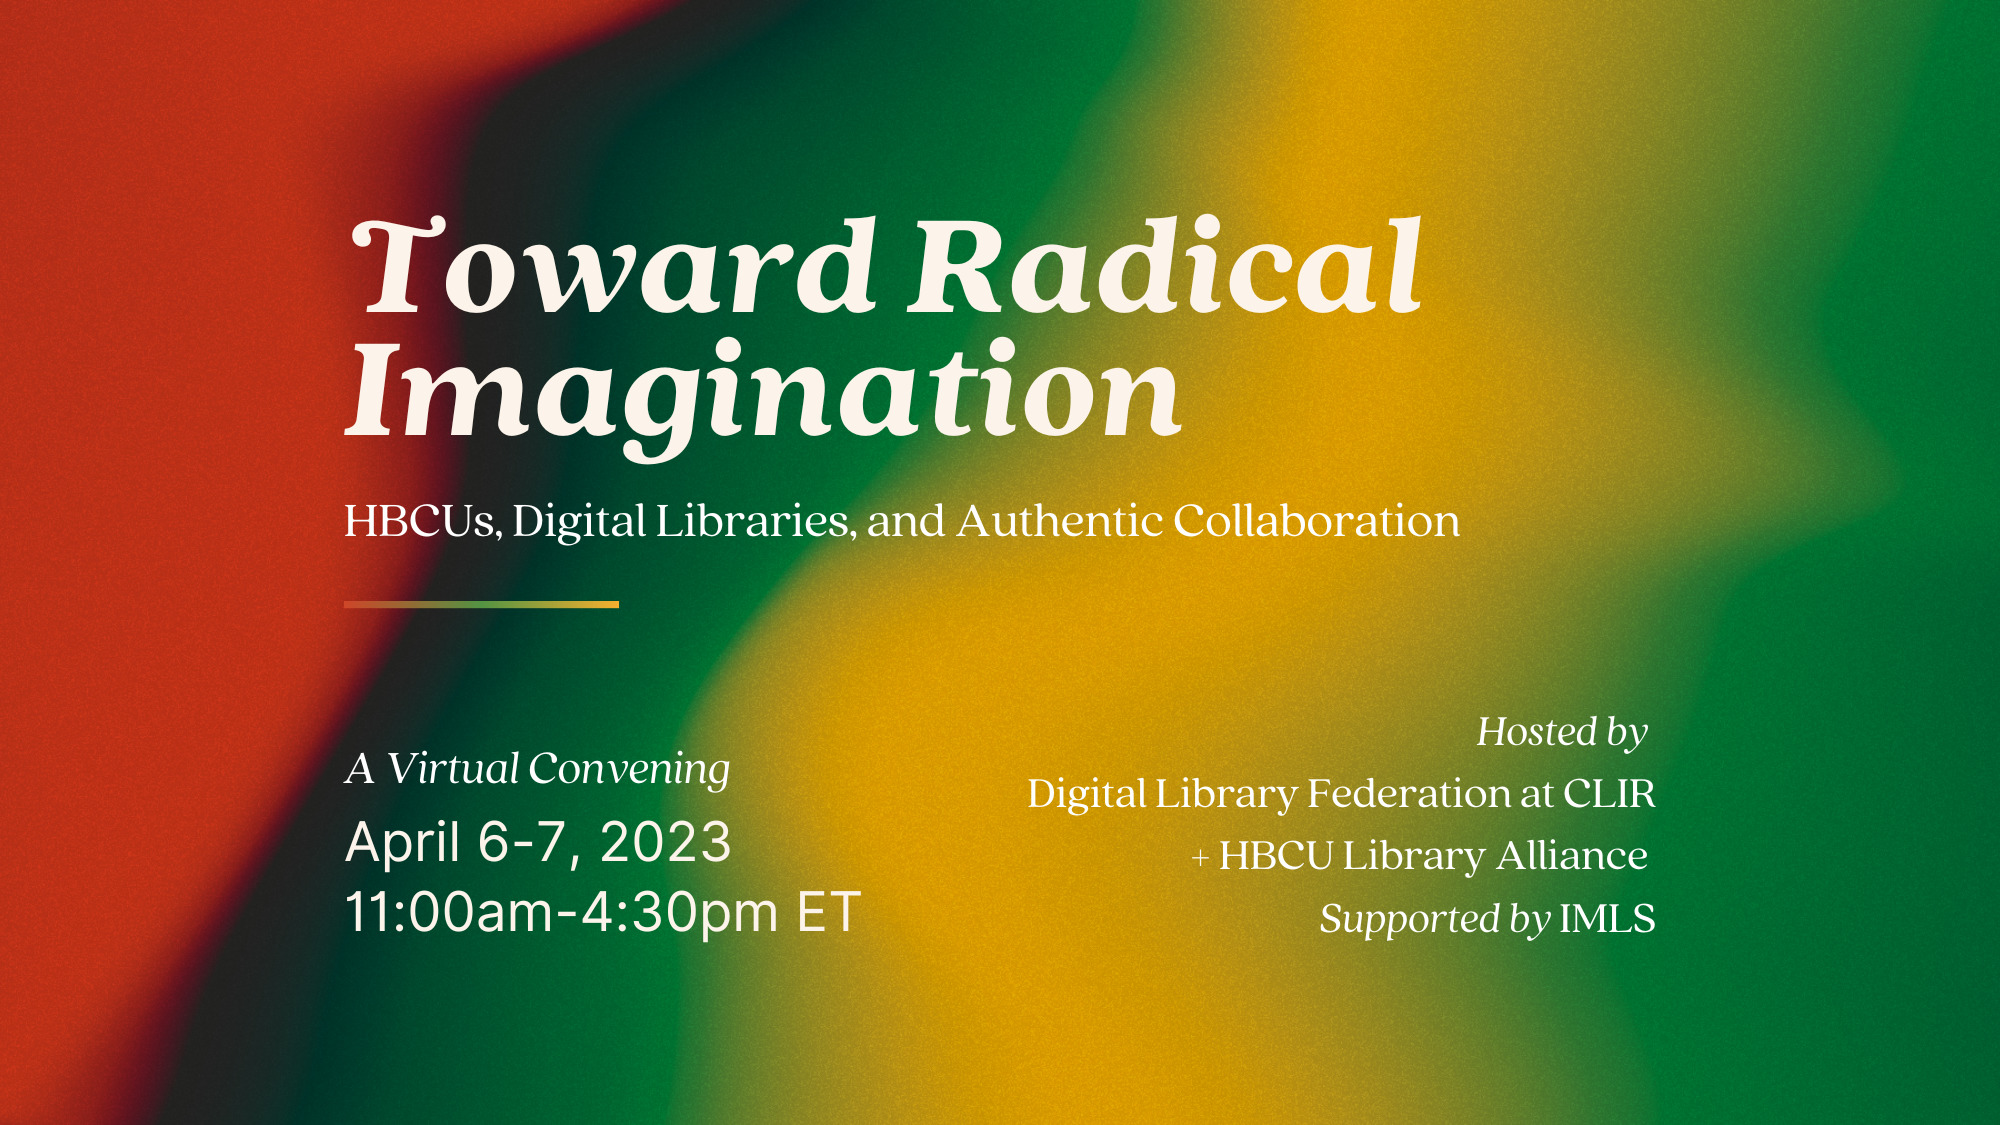  Graphic for Toward Radical Imagination with full title and subtitle at top. “A Virtual Convening, April 6-7, 2023, 11:00am-4:30pm ET,” at bottom right corner and “Hosted by Digital Library Federation at CLIR + HBCU Library Alliance, Supported by IMLS” at bottom left corner. Text is cream colored. Background is a gradient image with red, dark brown, green, yellow colors. 